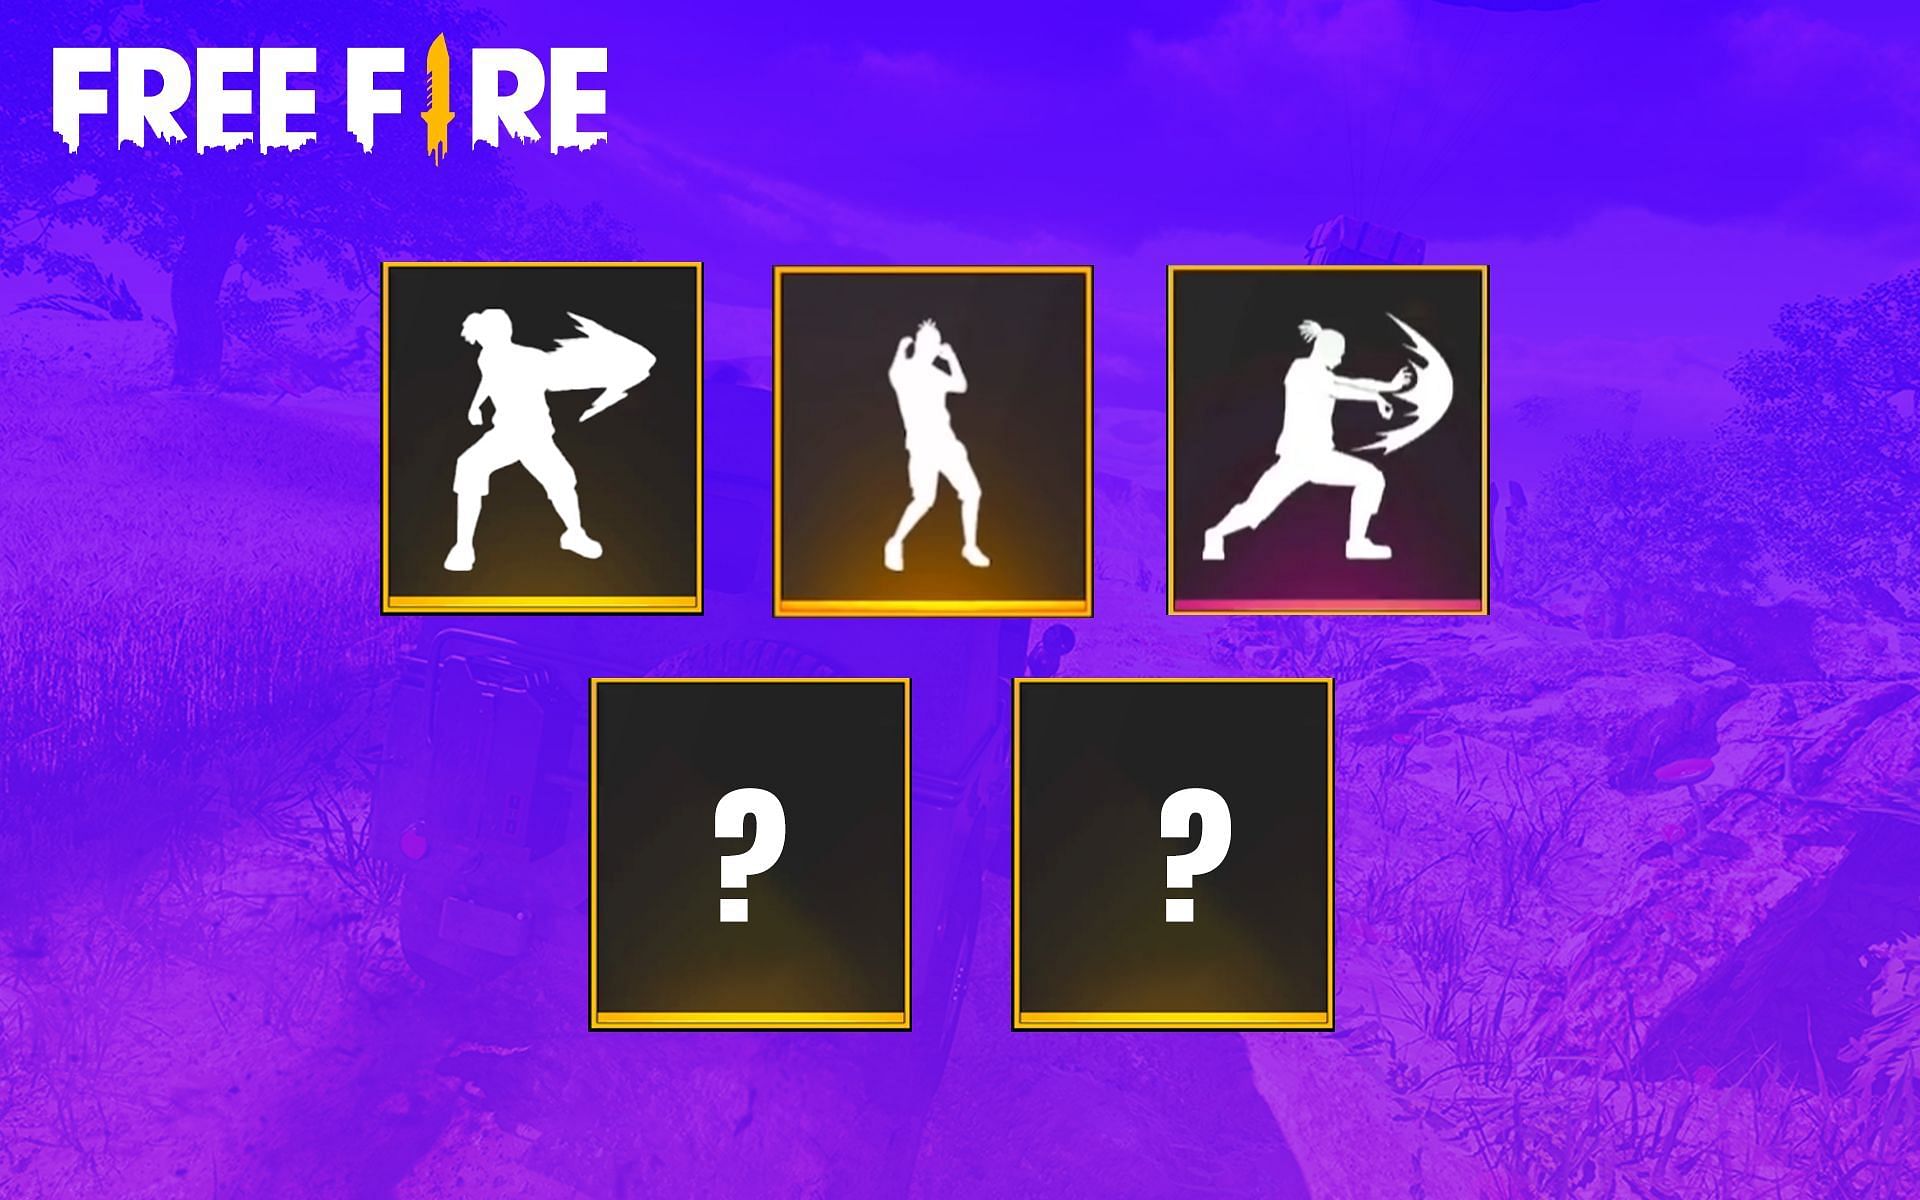 A handful of emotes were released in Free Fire this year (Image via Sportskeeda)